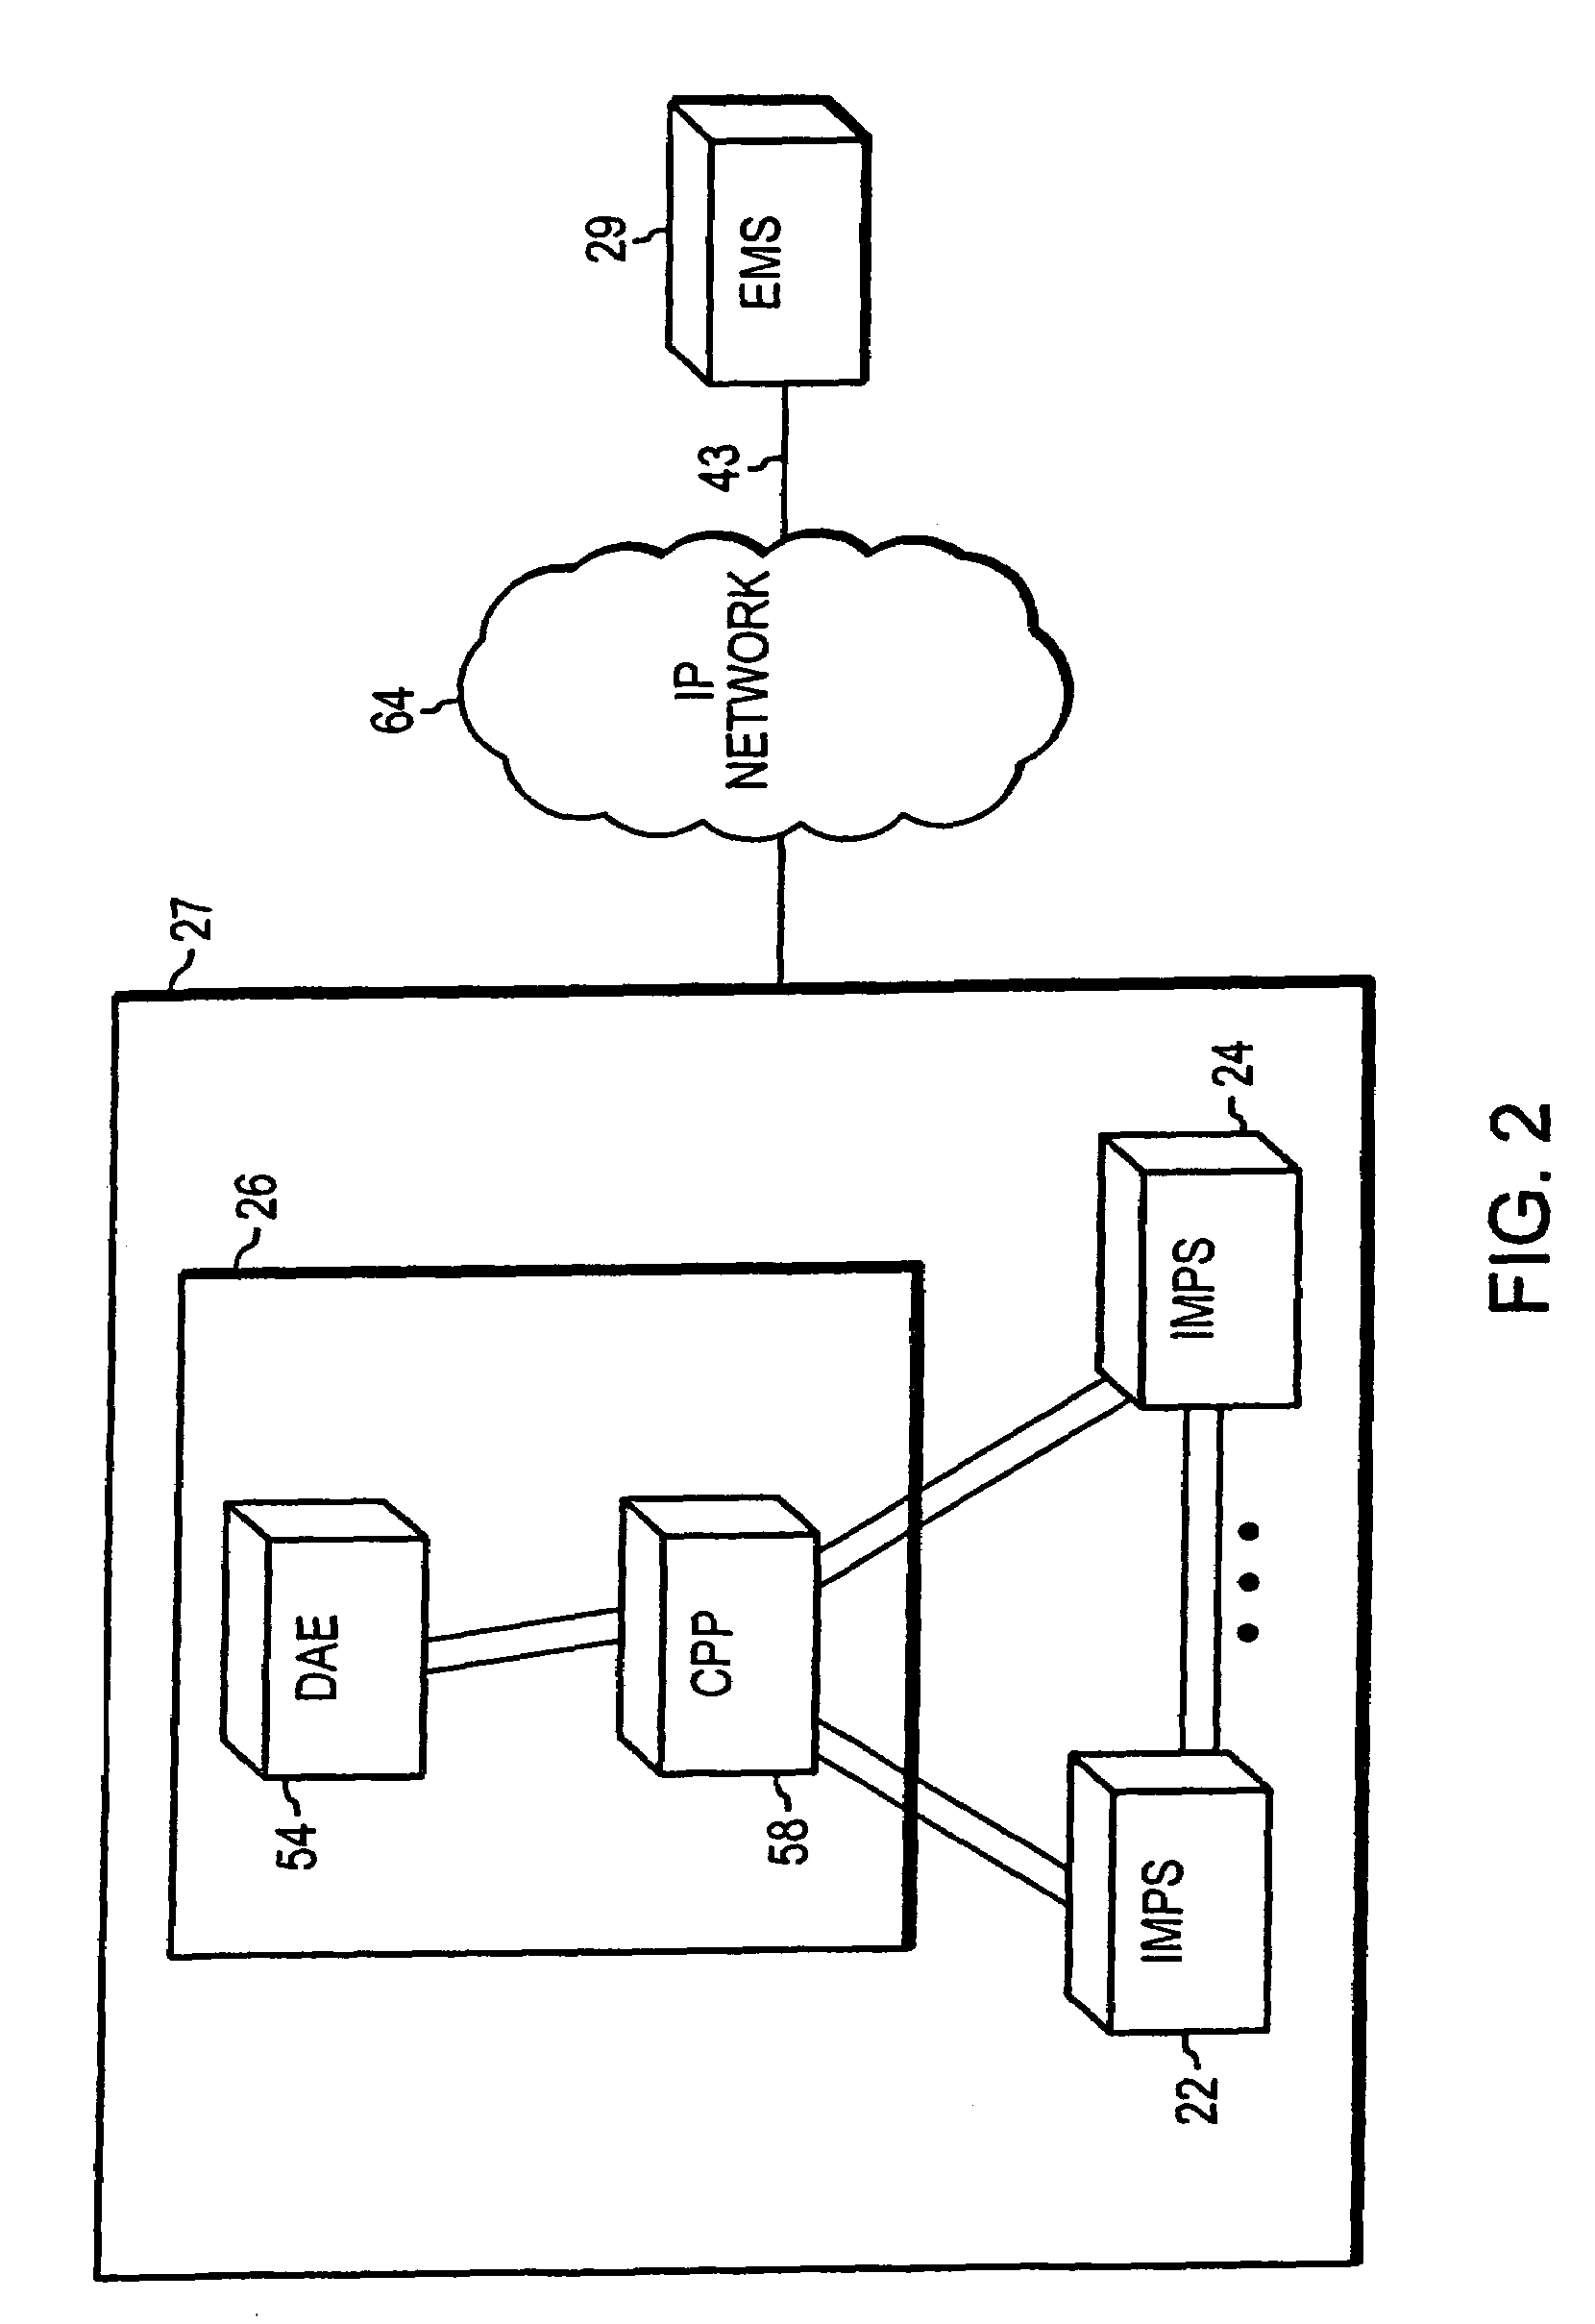 Systems and methods for managing virtualized logical units using vendor specific storage array commands